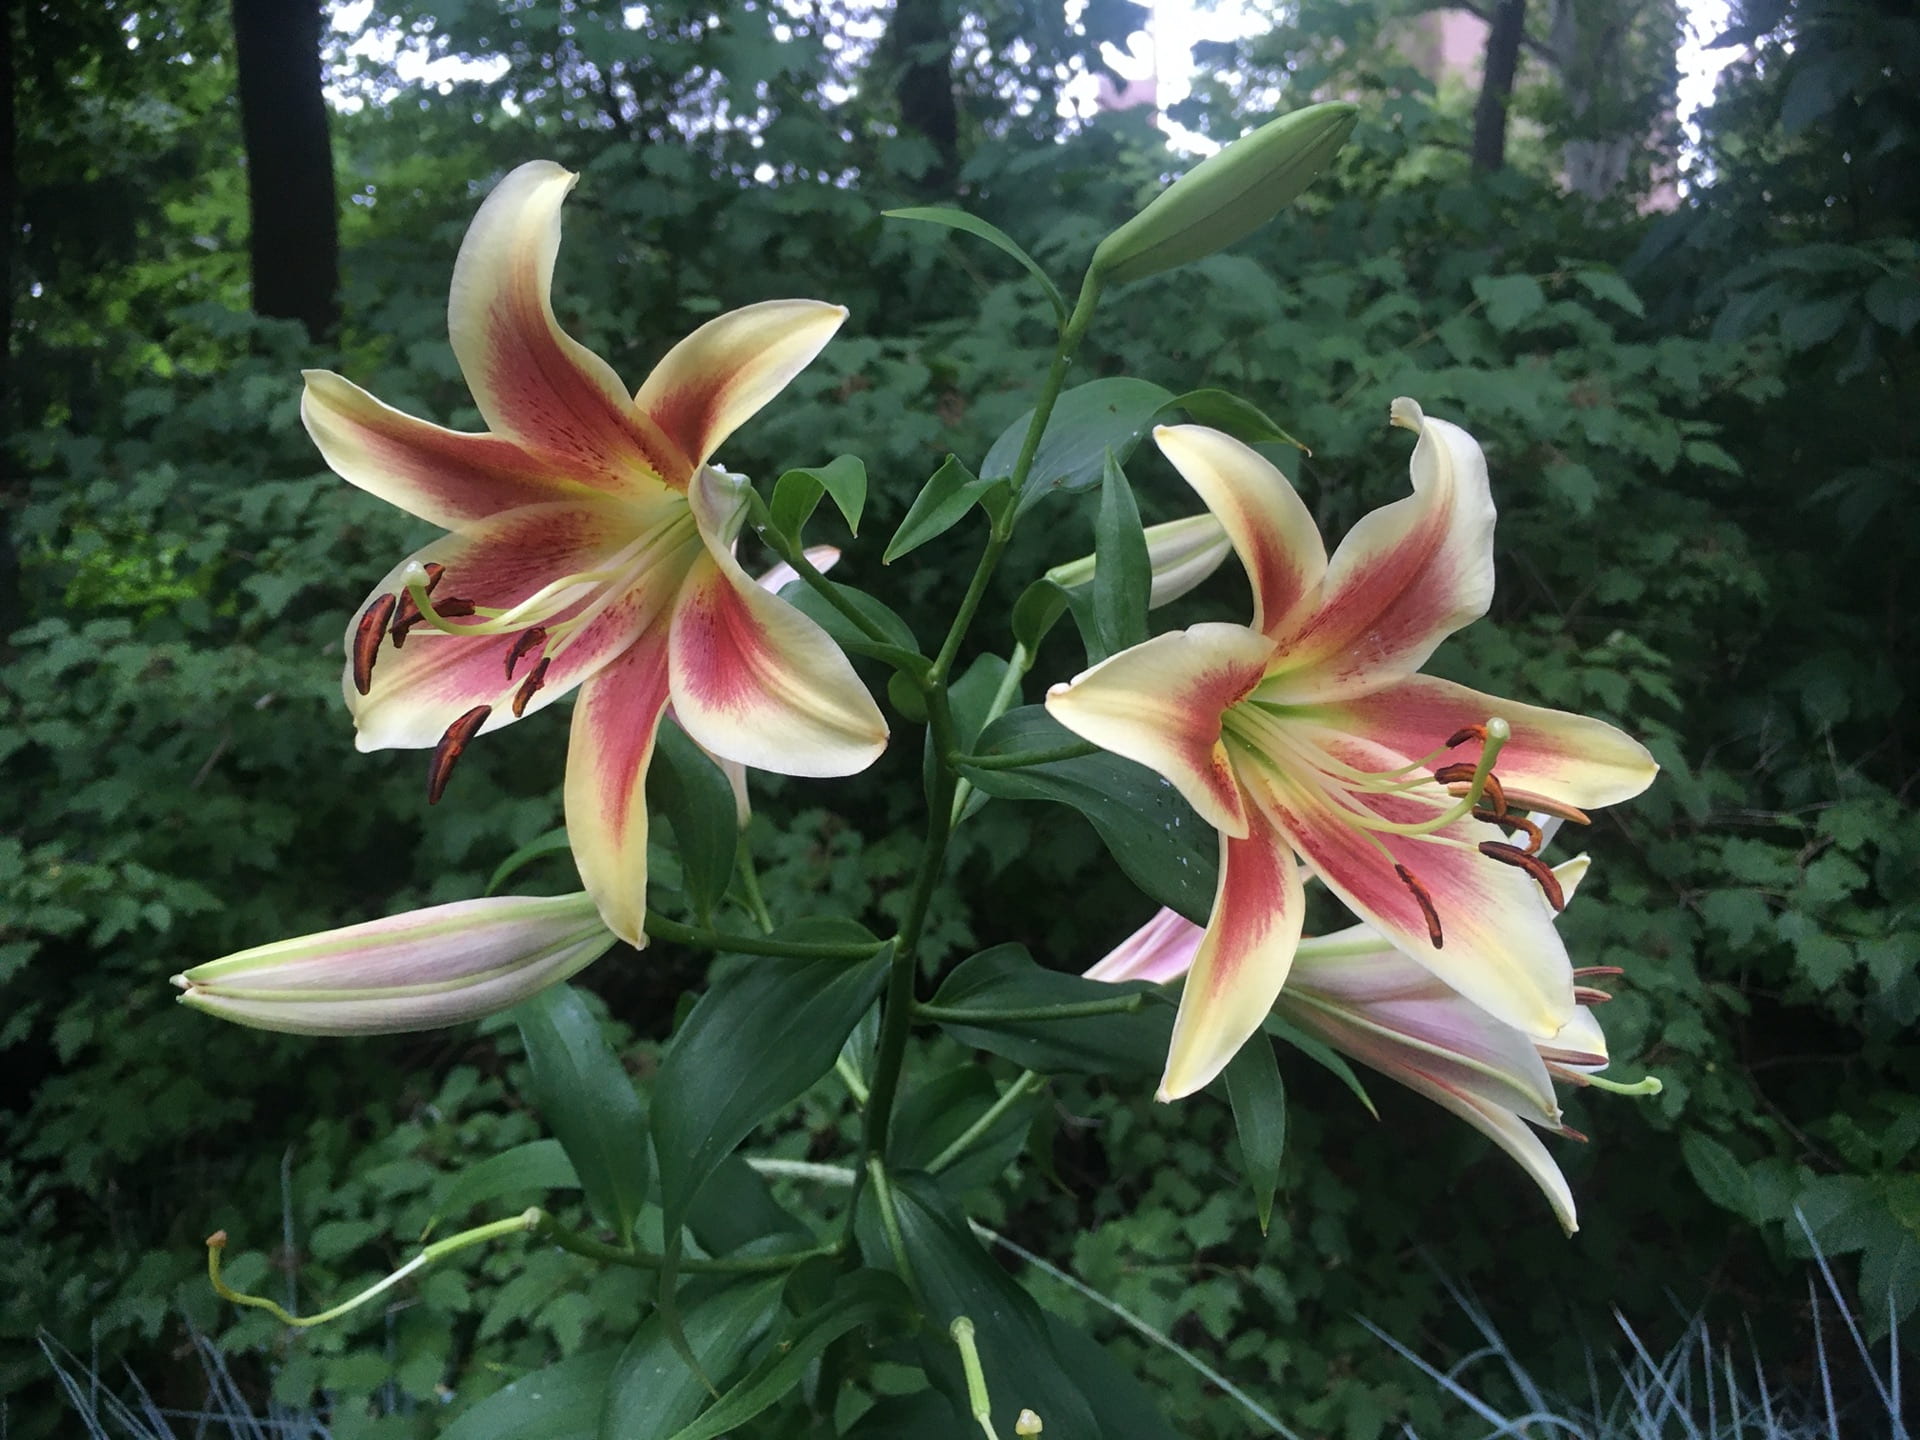 Lily flowers (Lilium cv.) fill the summer garden with their perfume.